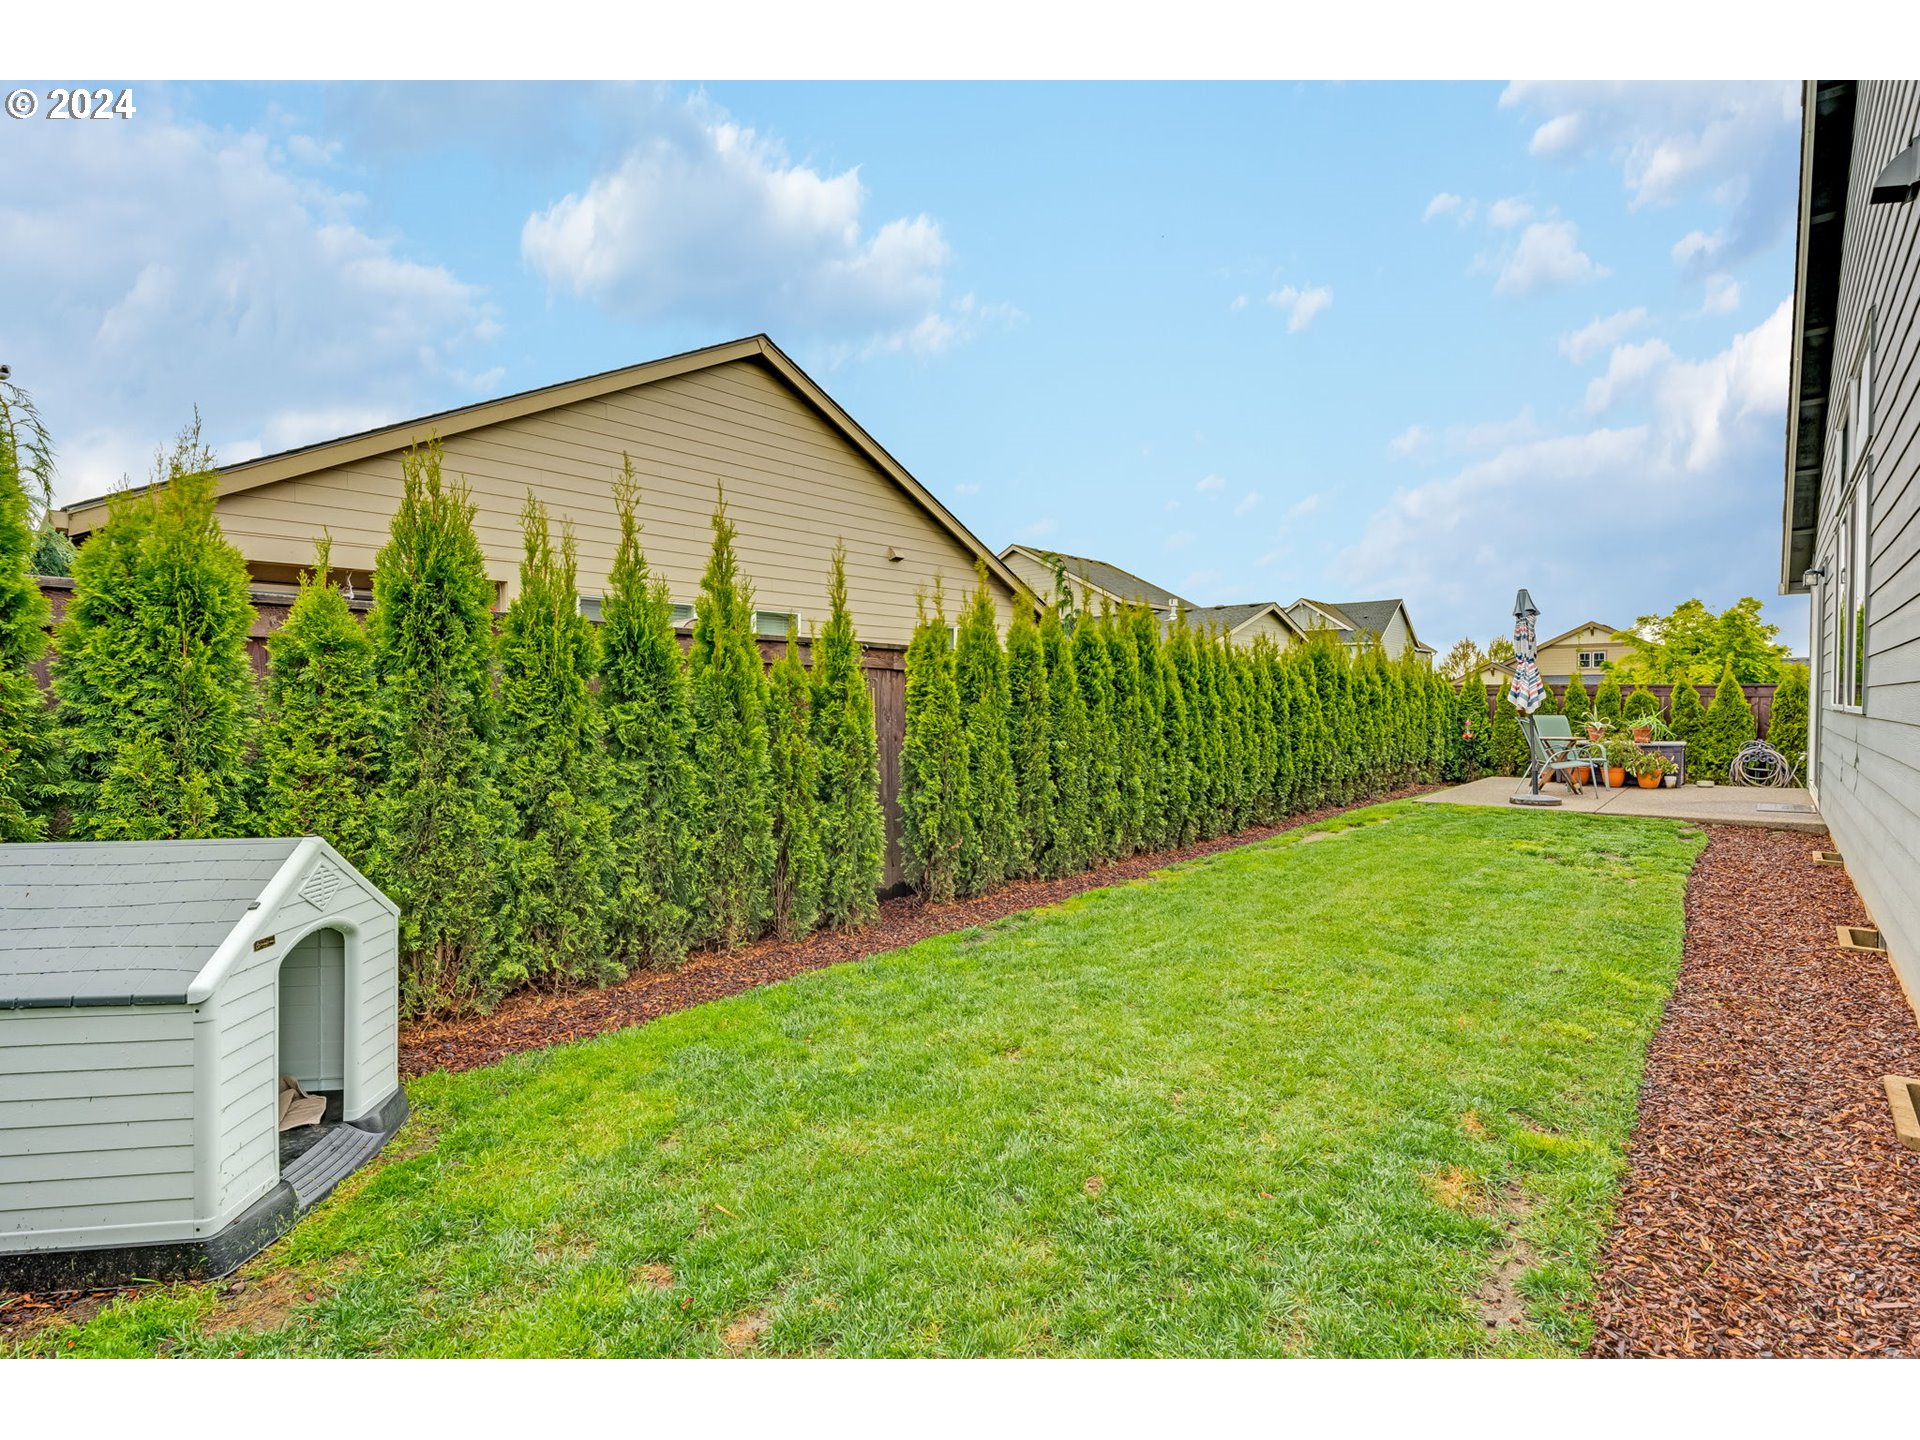 5109 NW 138th St, Vancouver, WA 98685